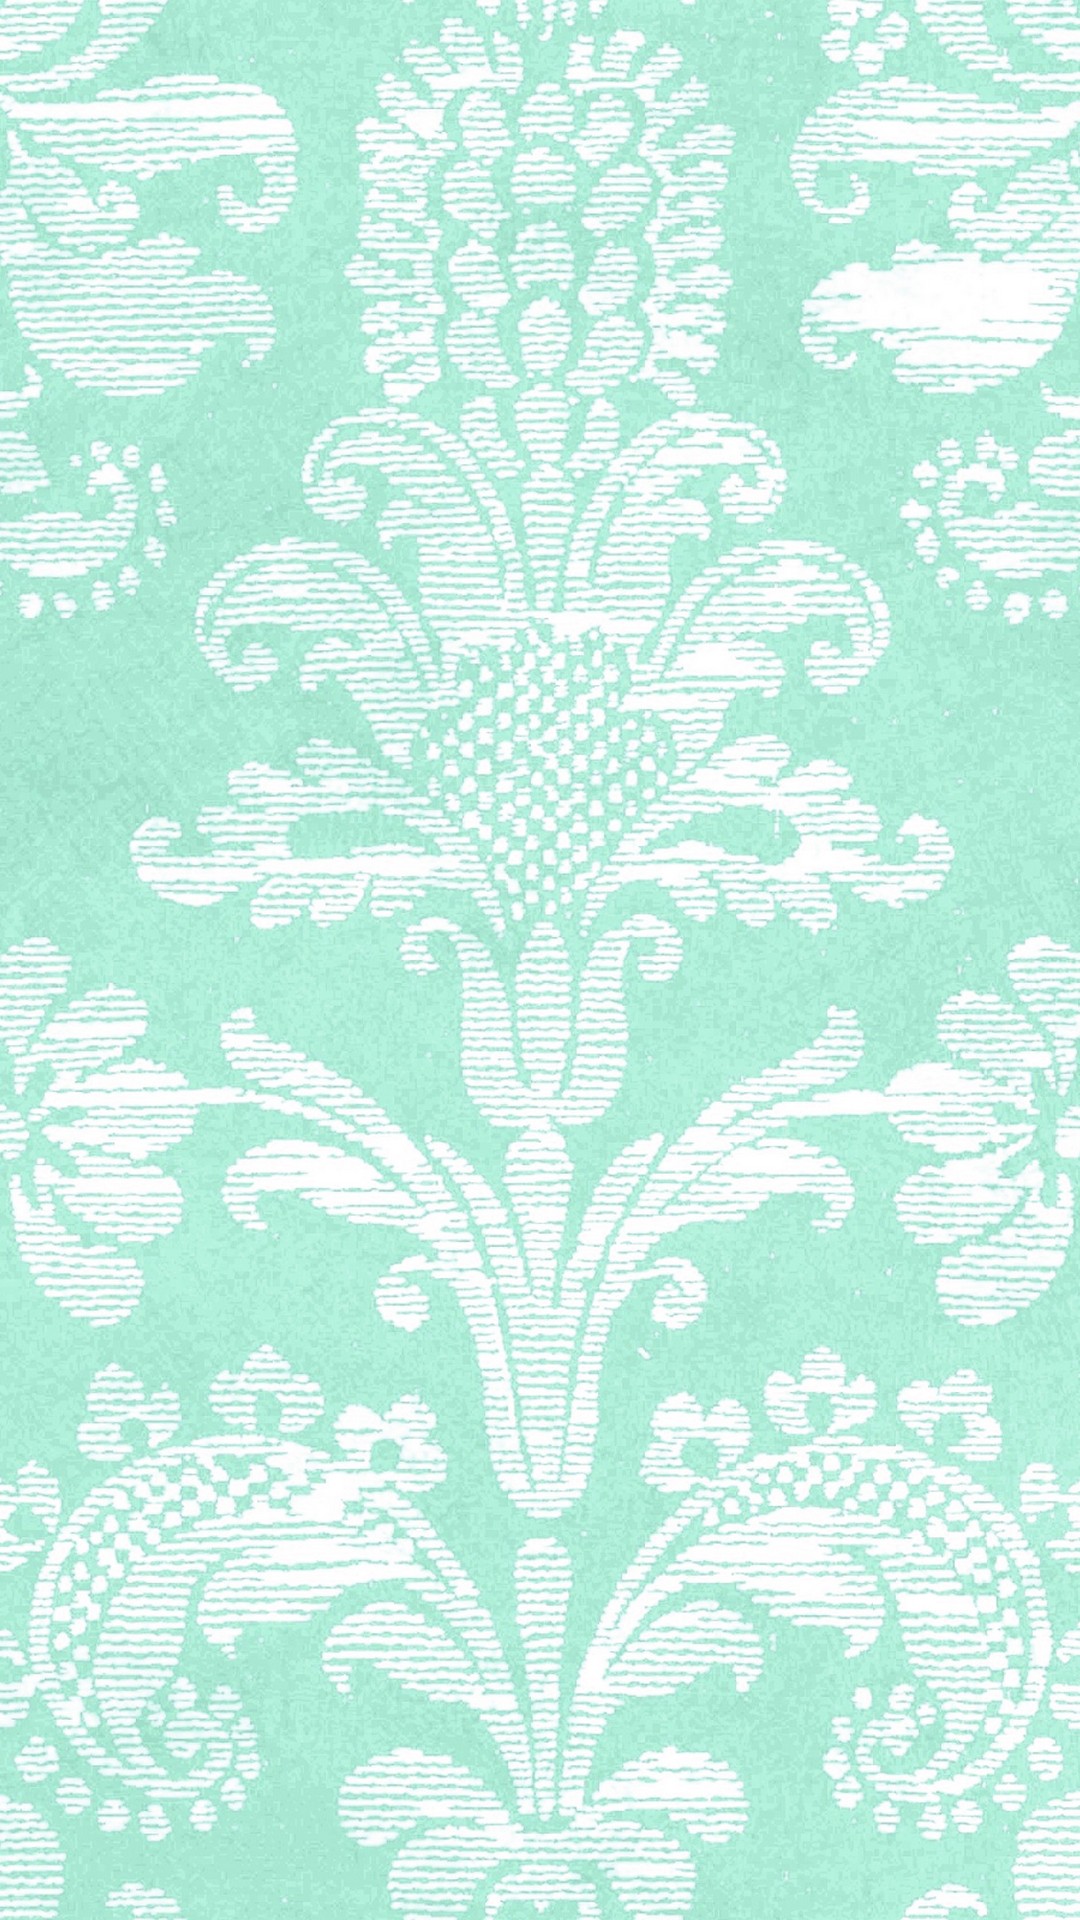 Mint Green iPhone X Wallpaper with resolution 1080X1920 pixel. You can use this wallpaper as background for your desktop Computer Screensavers, Android or iPhone smartphones